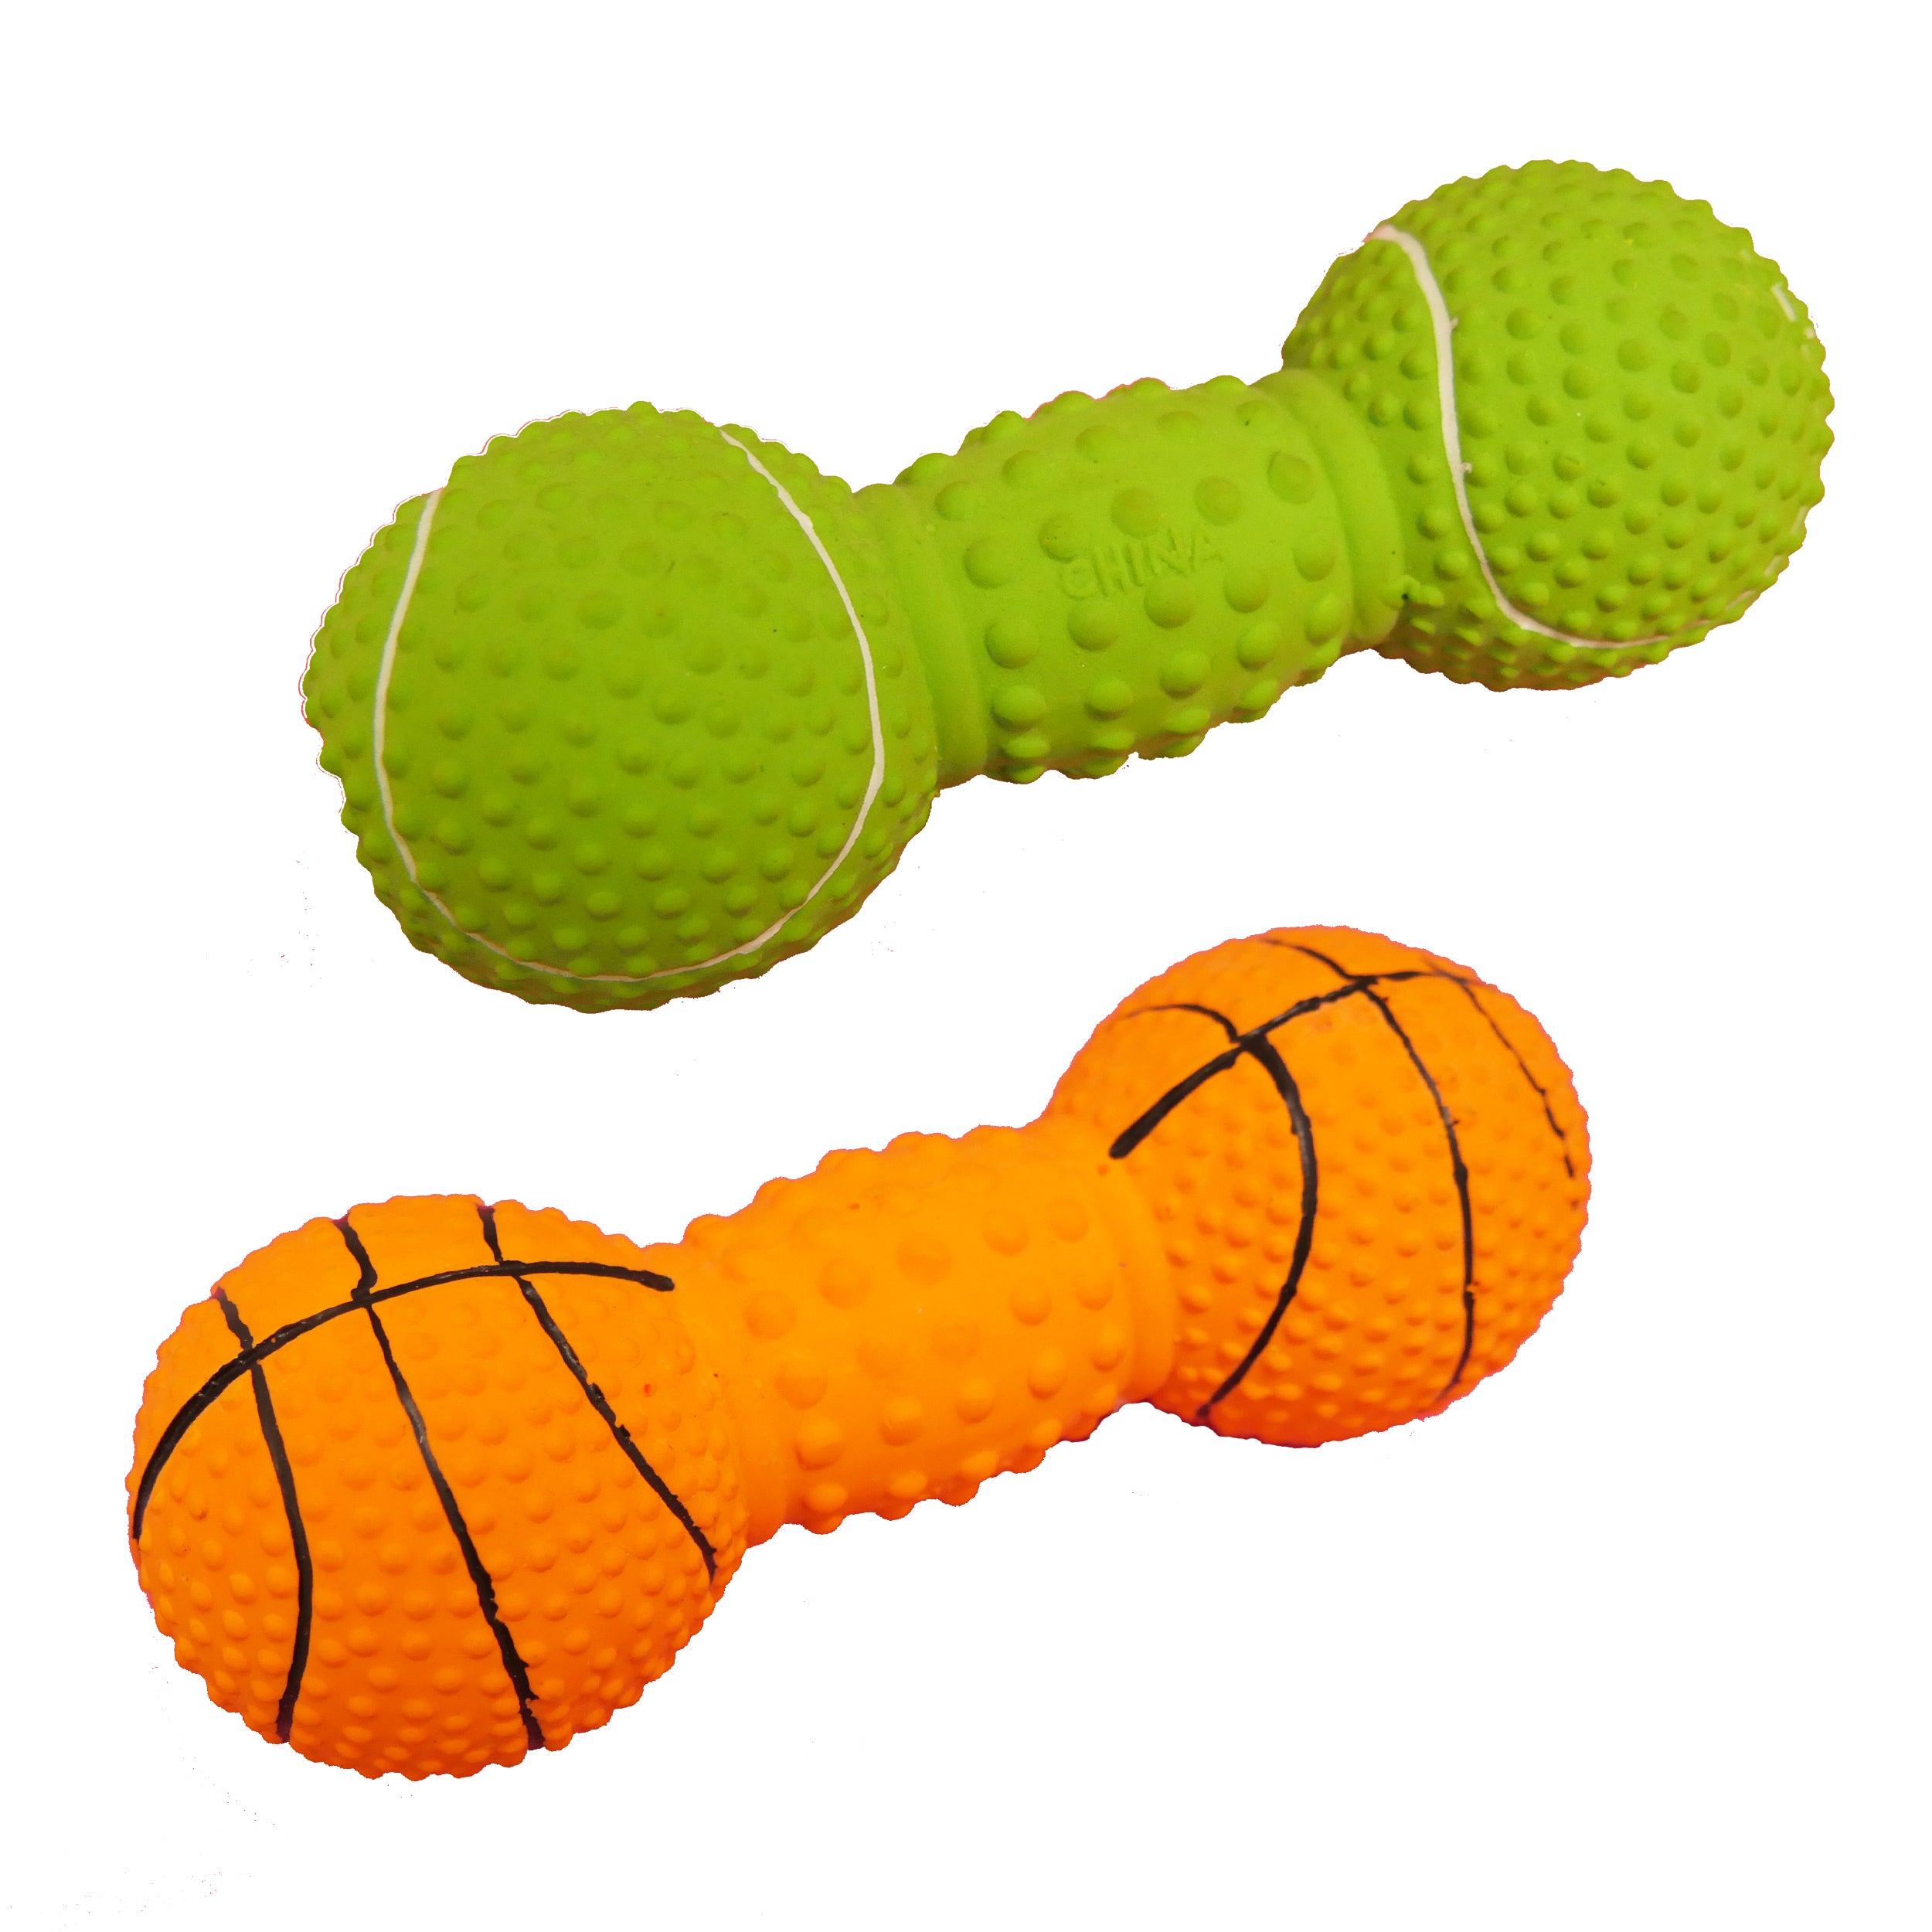 [Dog toy] 2-Color rubber tennis ball, basket ball dumbbell toy